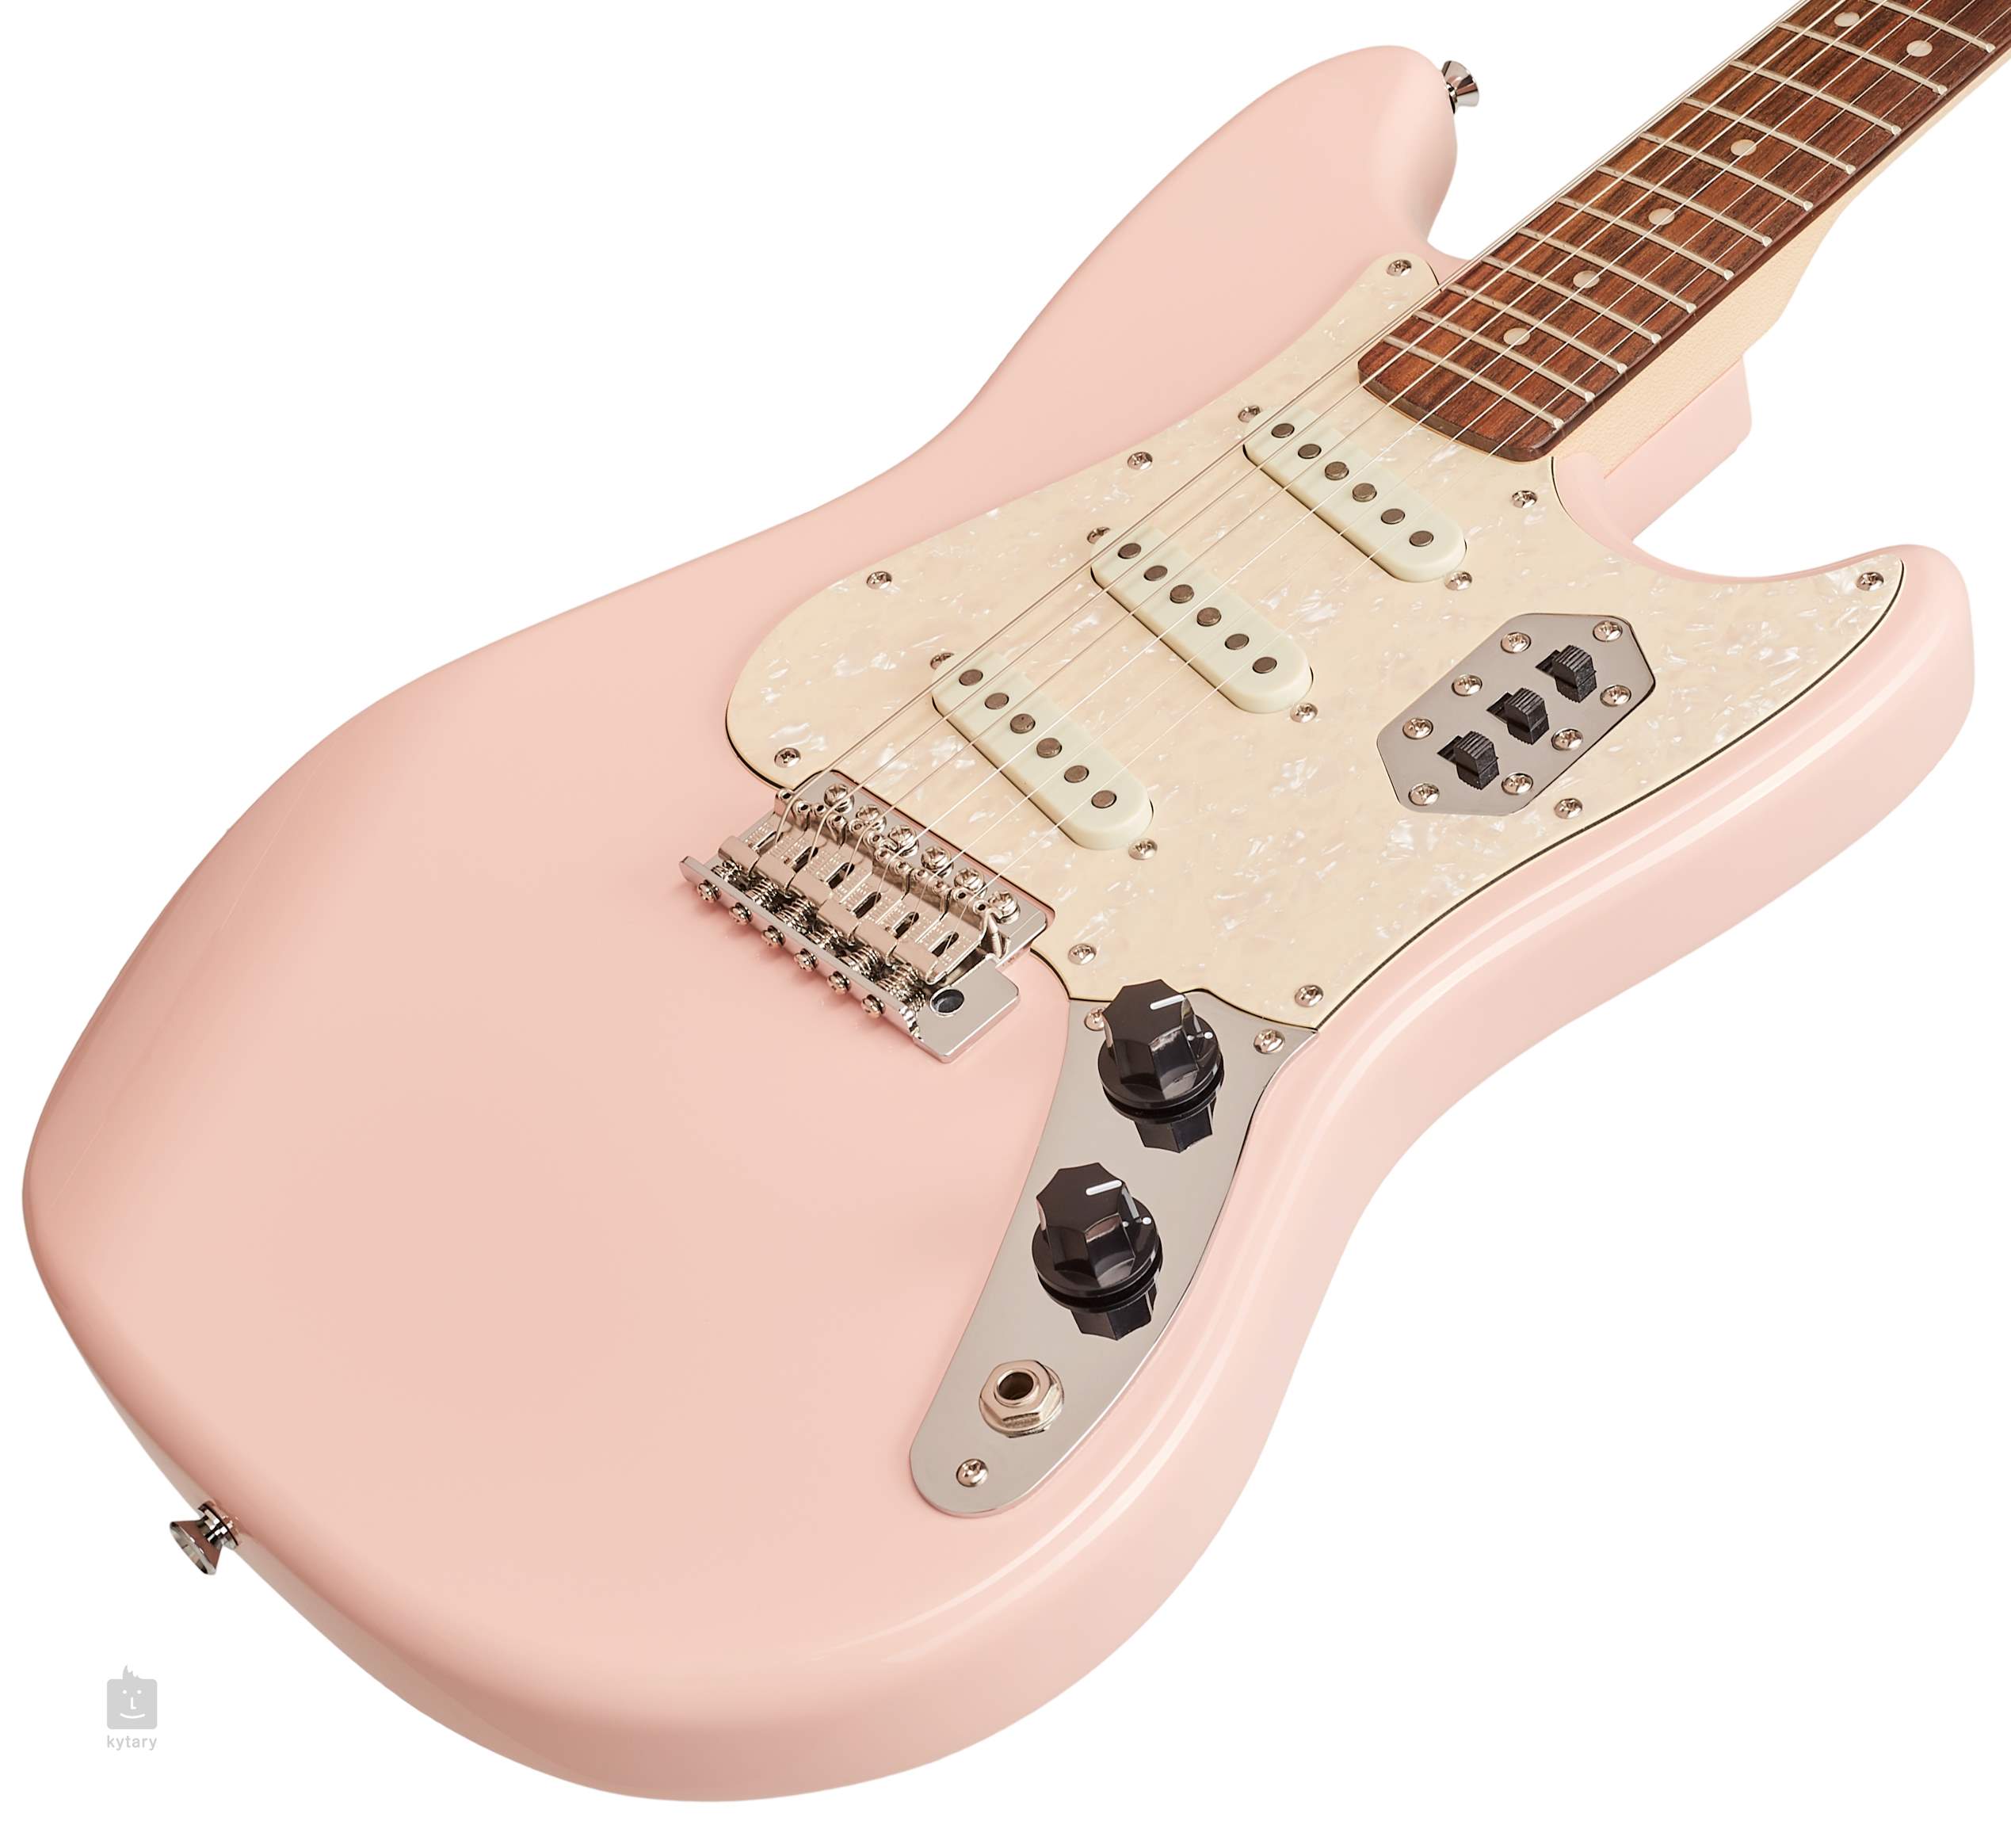 Squier by fender cyclone サイクロン エレキギター - 楽器/器材